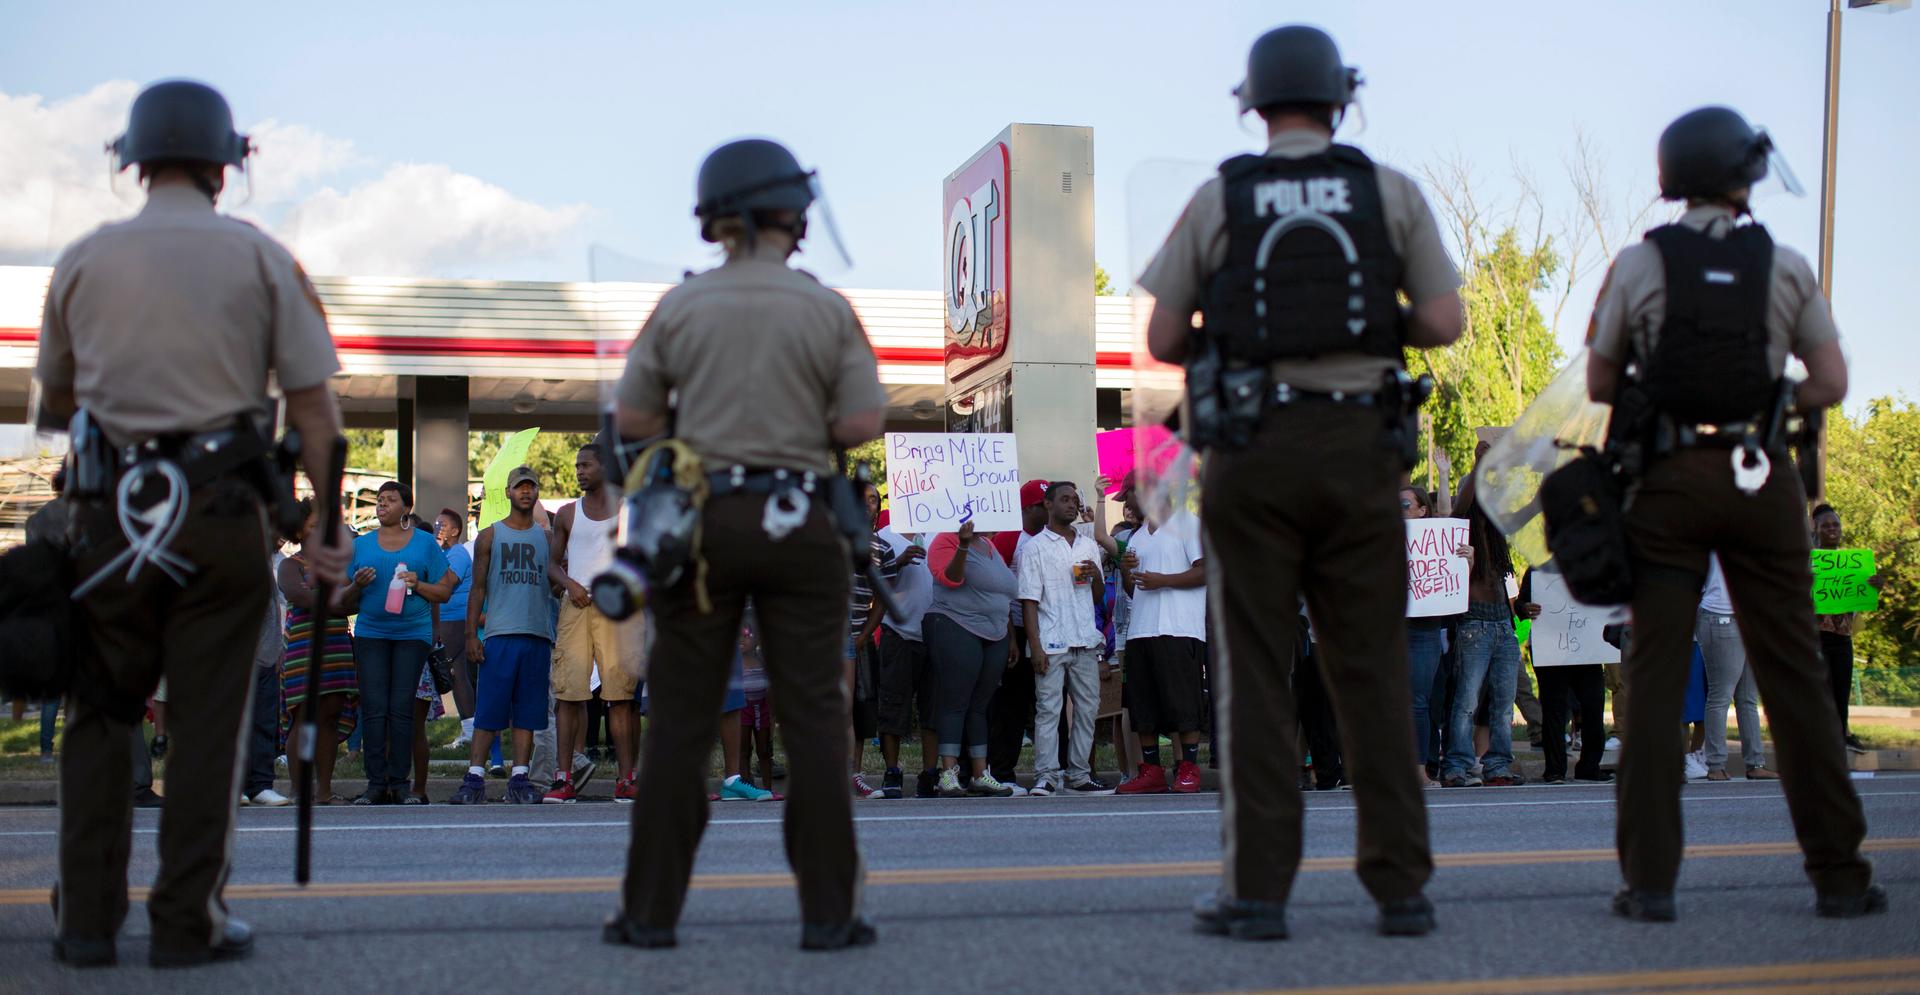 Police officers watch as demonstrators protest the death of black teenager Michael Brown in Ferguson, Missouri August 12, 2014. 